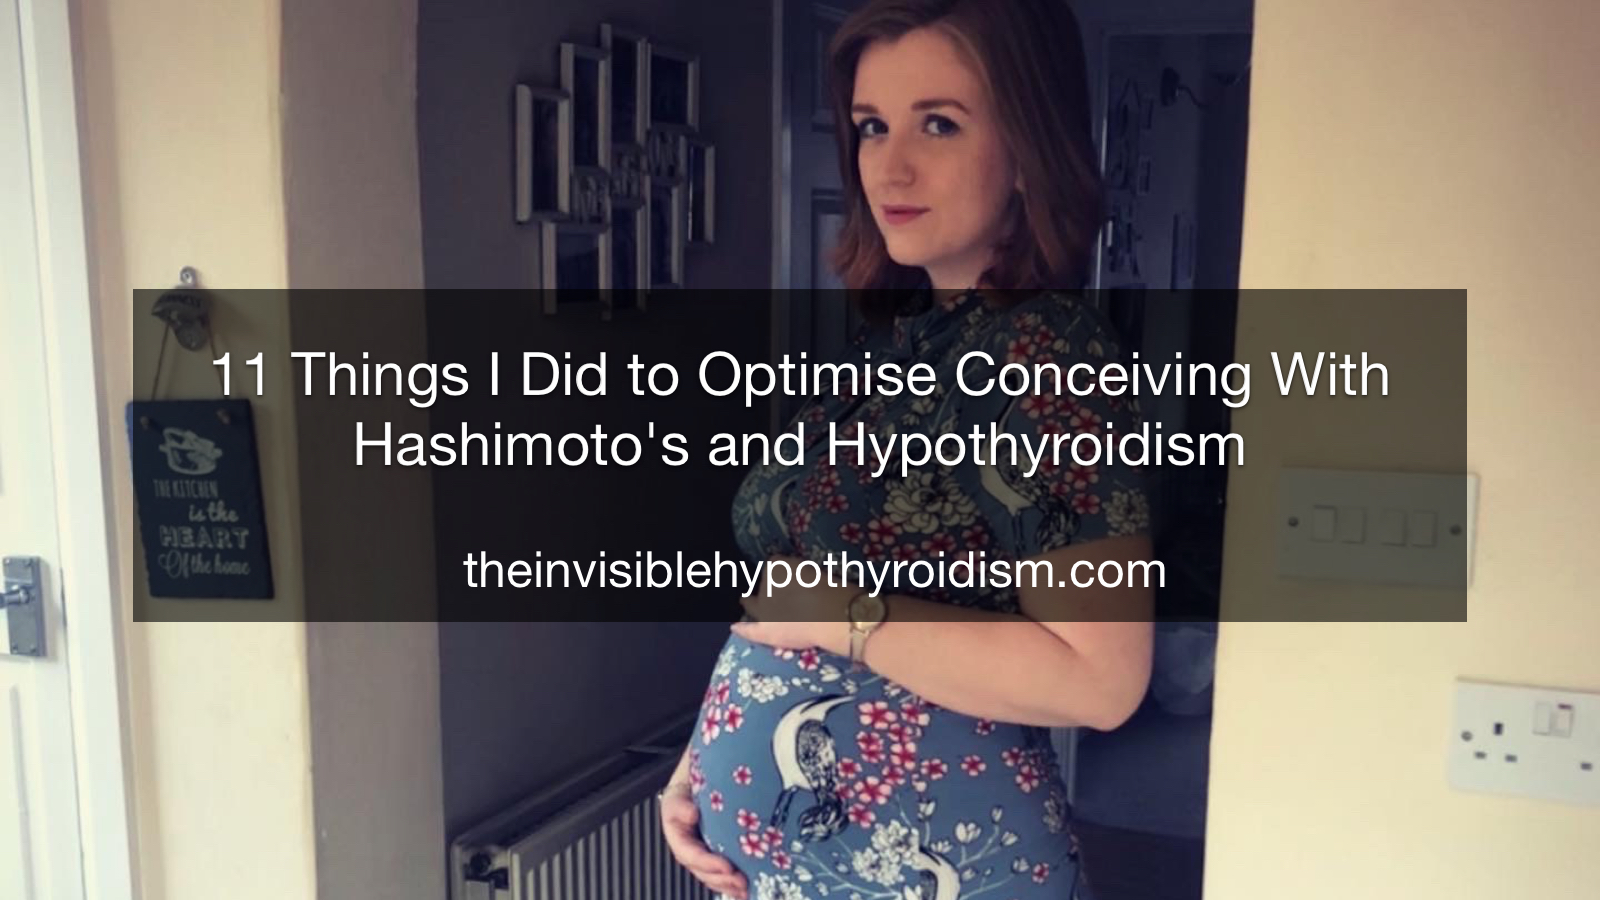 11 Things I Did to Optimise Conceiving With Hashimoto's and Hypothyroidism